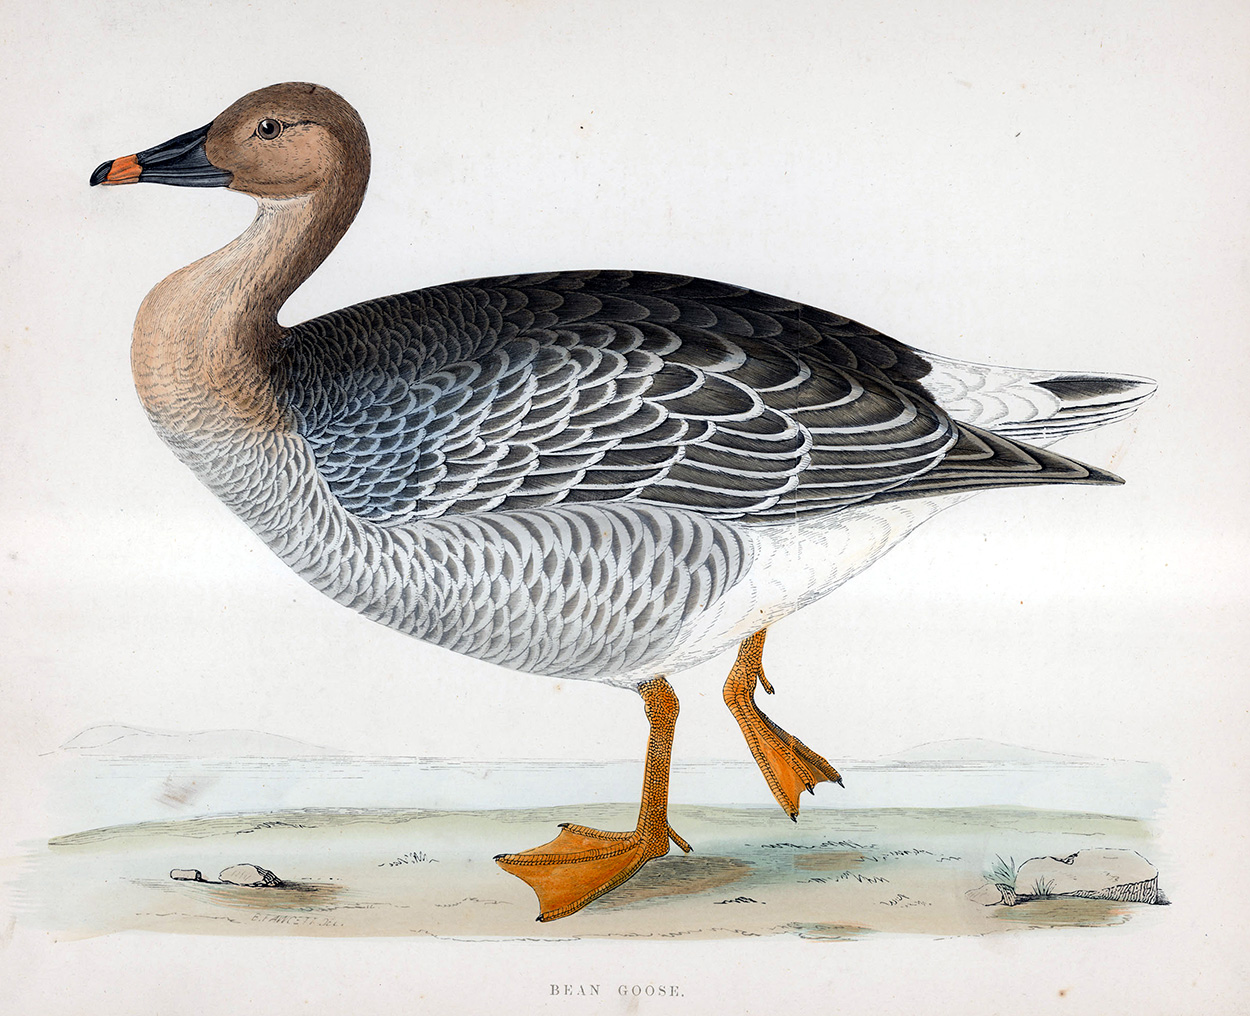 Bean Goose - hand coloured lithograph 1891 (Print) art by Beverley R Morris at The Illustration Art Gallery